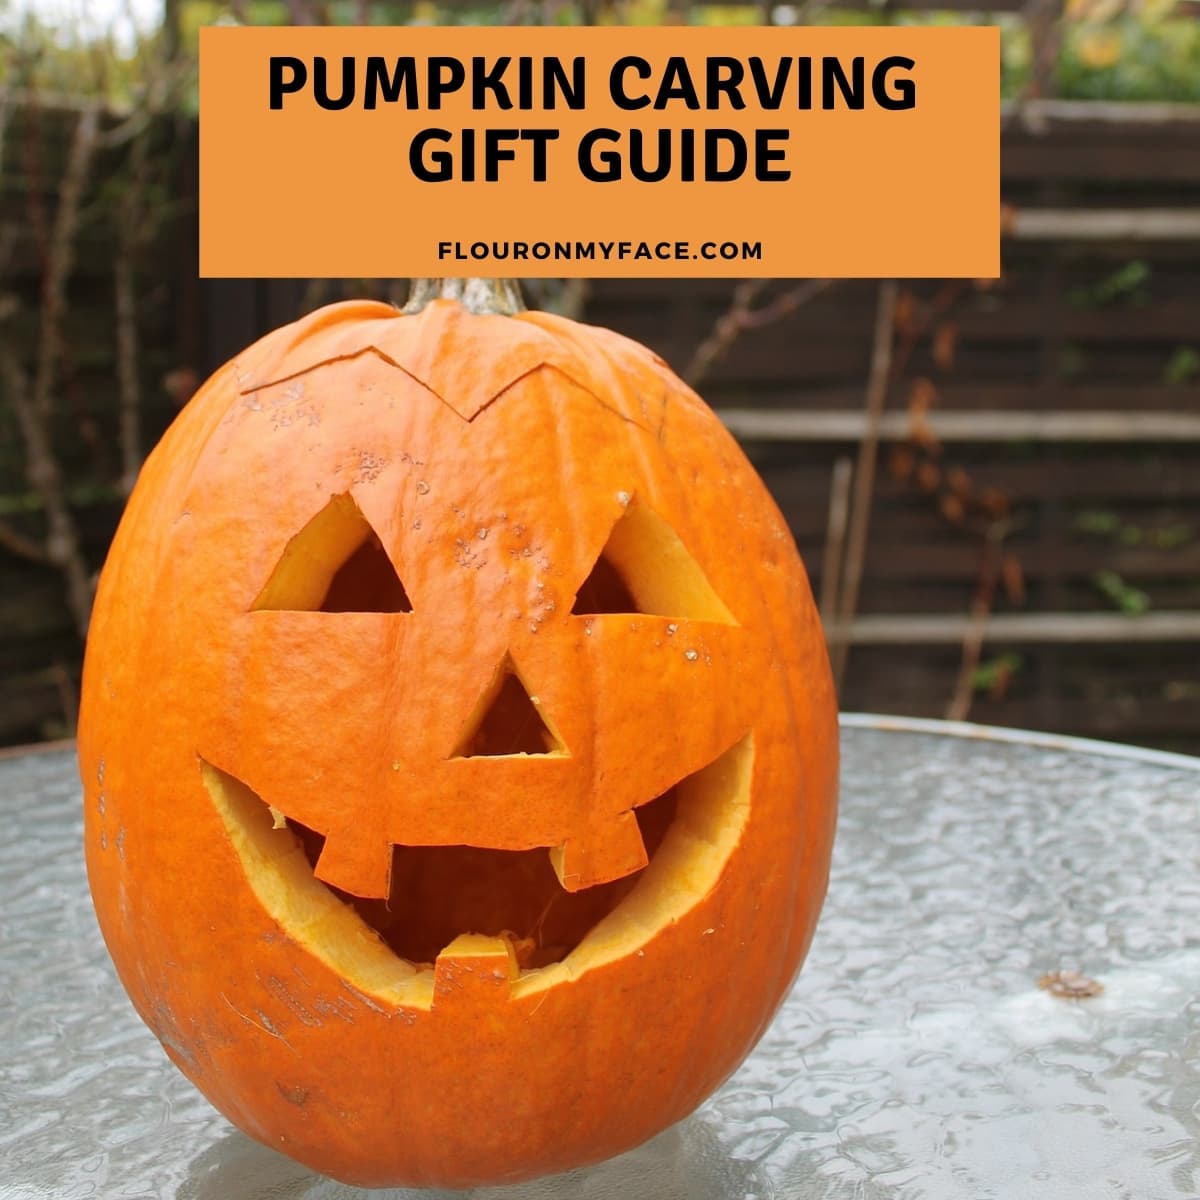 Pumpkin Carving Gift Guide - Flour On My Face